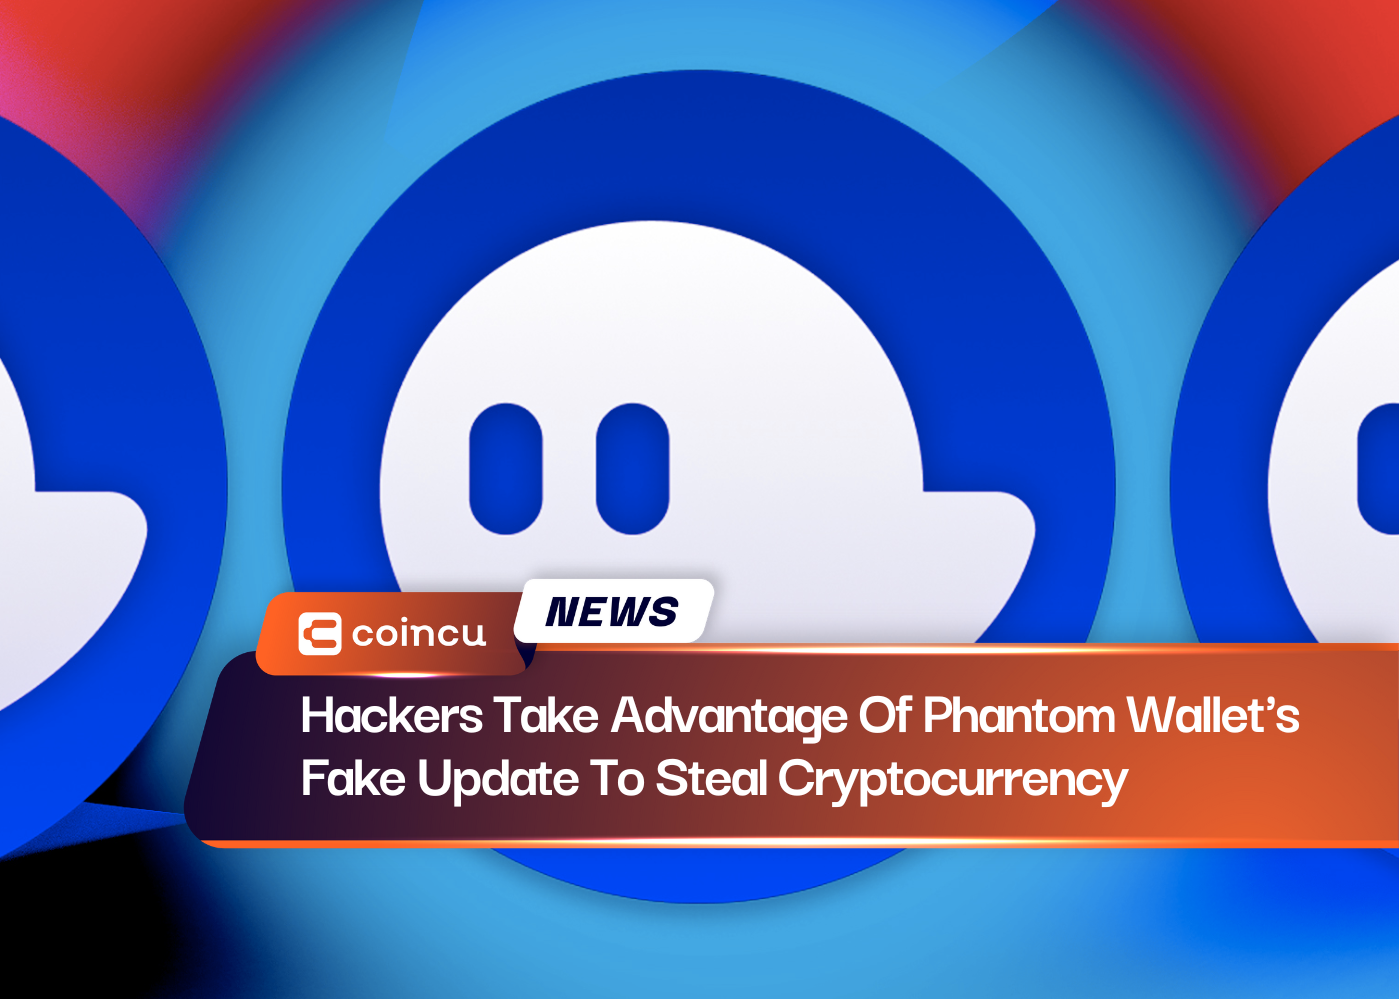 Hackers Take Advantage Of Phantom Wallet's Fake Update To Steal Cryptocurrency